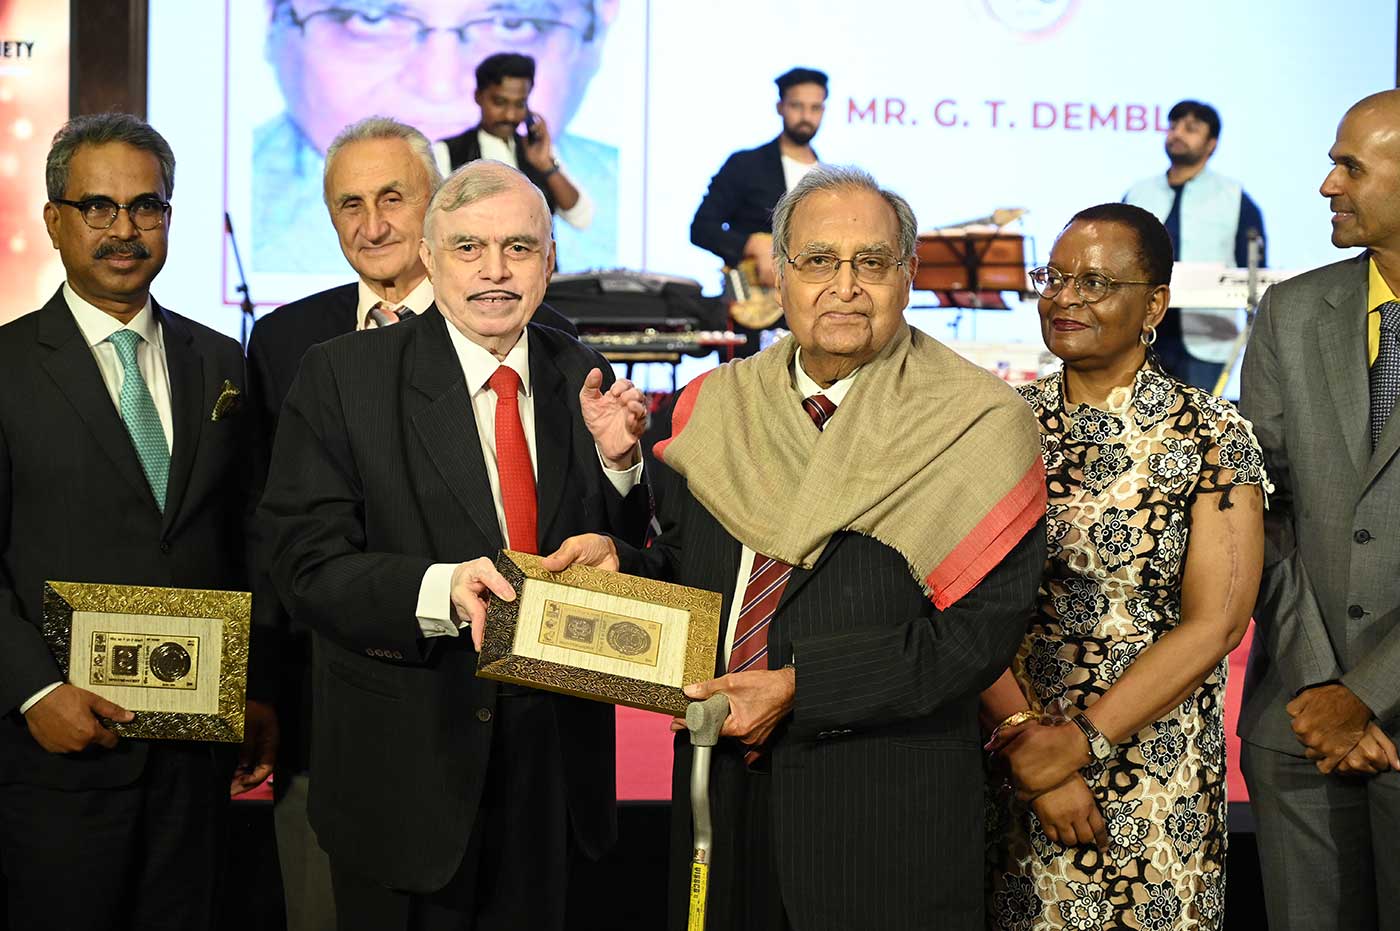 Felicitating Shri. G.T. Dembla, Past Chairman and advisory council member for his contributions to TEI. 